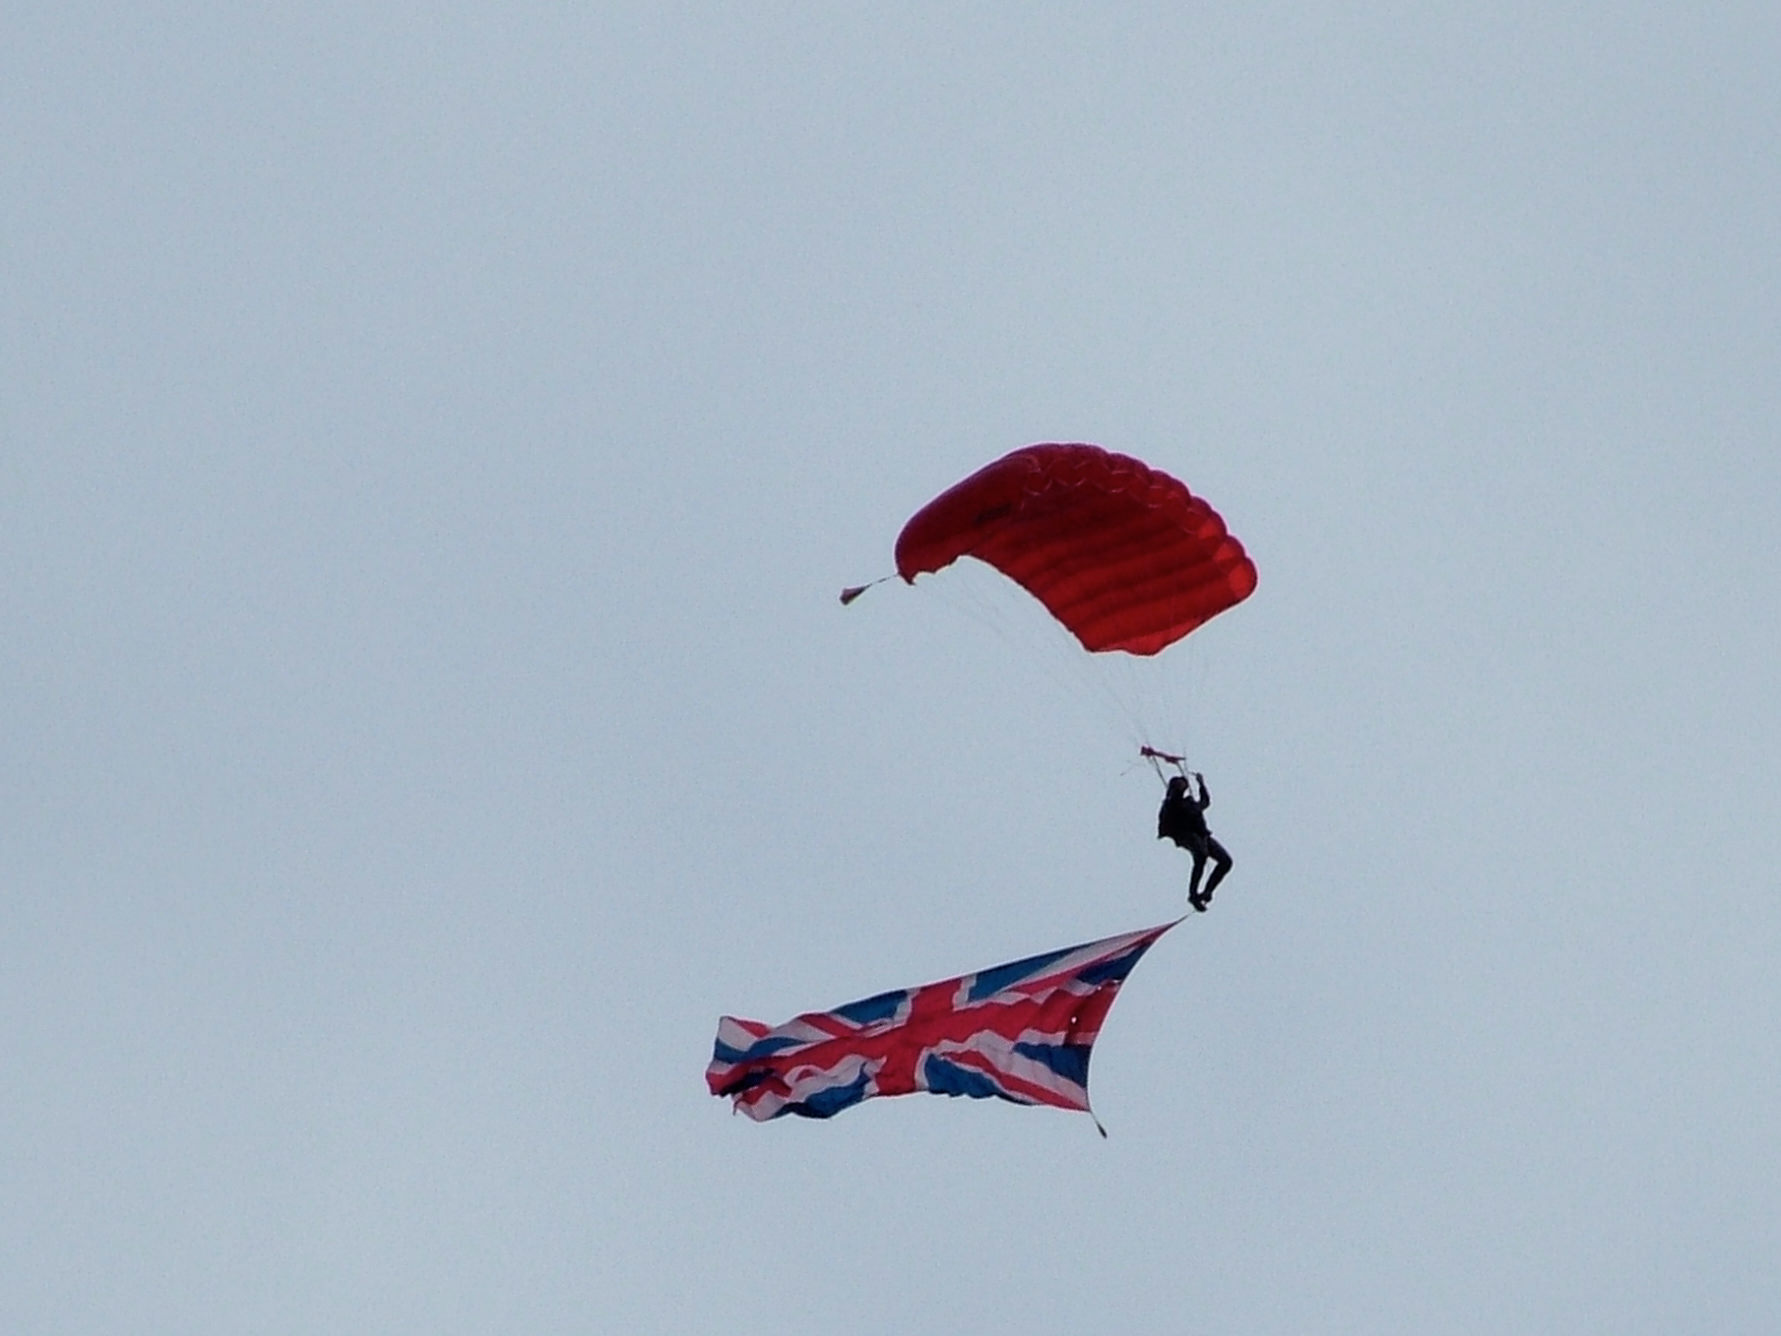 The firemen parachuted in to raise money in 2005